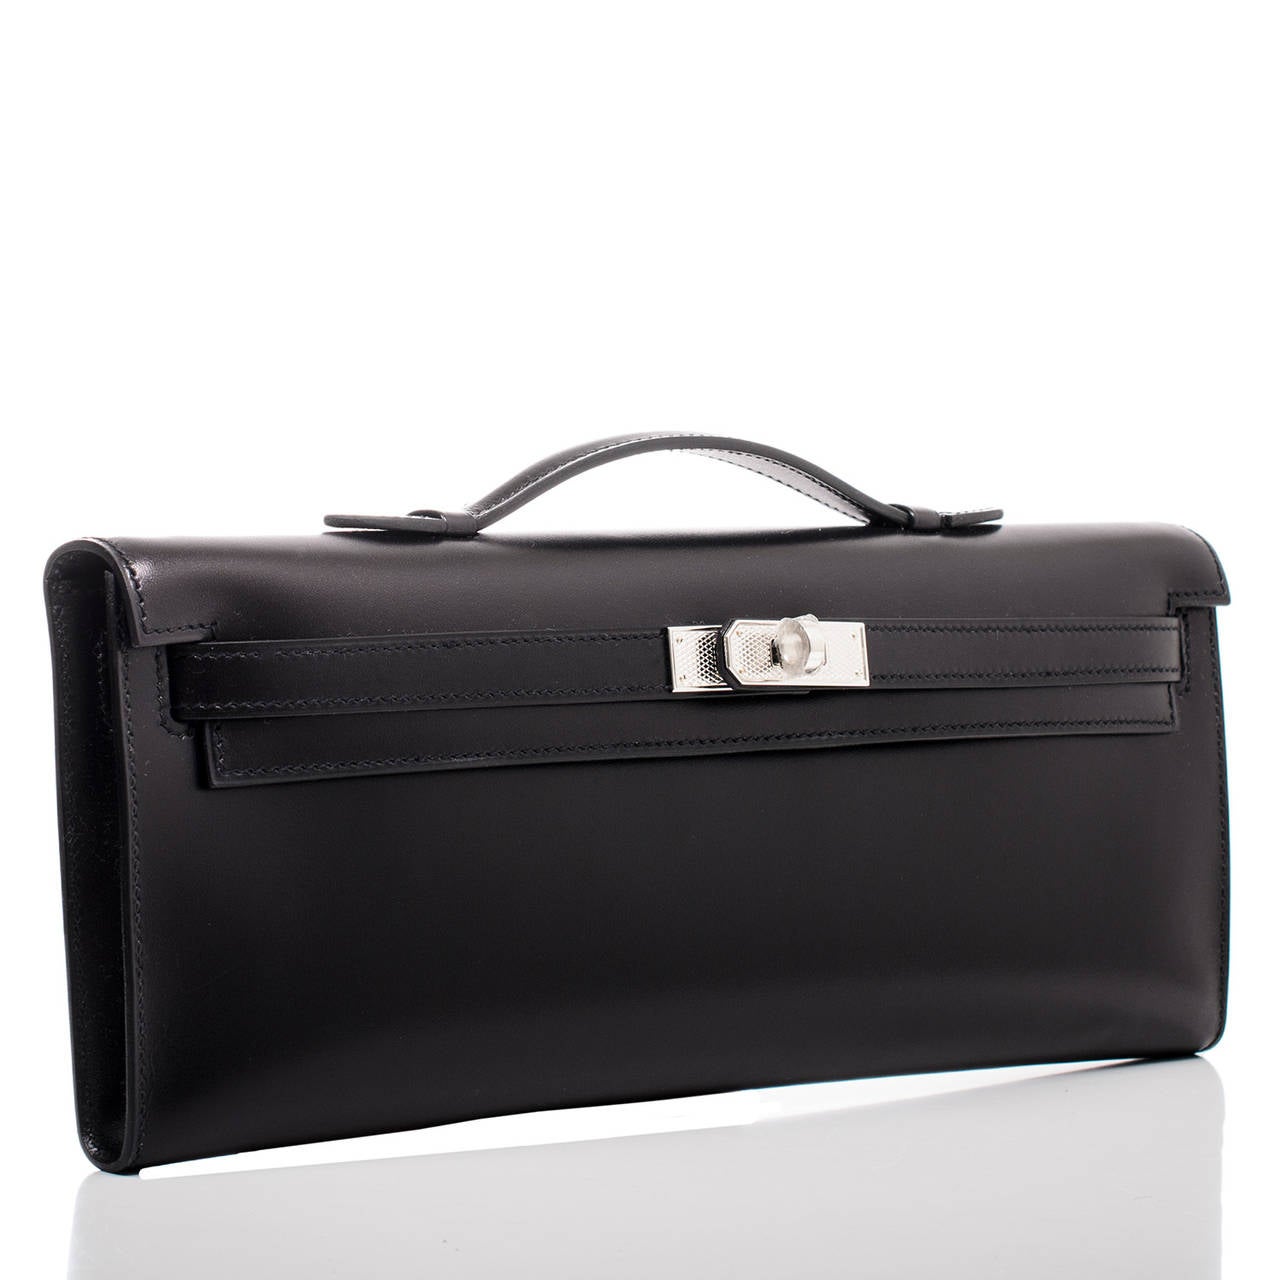 Hermes Black Kelly Cut clutch in box (smooth calfskin) leather with palladium guilloche hardware.

Hermes introduced the Kelly Cut in the fall/winter collection in 2006. The long, sleek lines with the small handle accented by the iconic Kelly